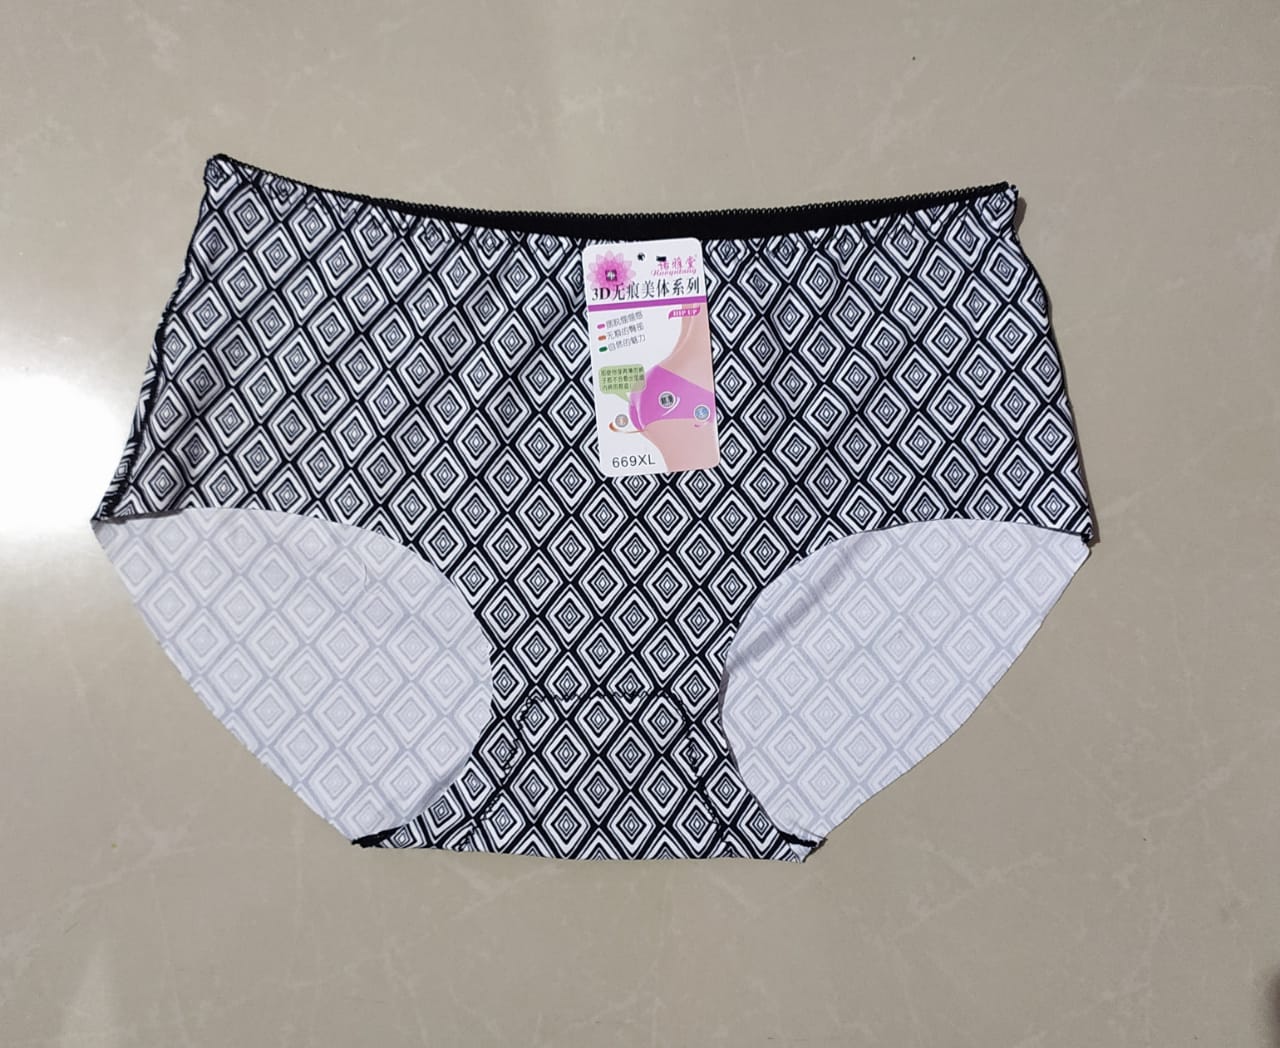 BODYCARE COTTON PRINTED PANTIES-200D – PACK OF 3 [ Nari 2850] – Online  Shopping Point